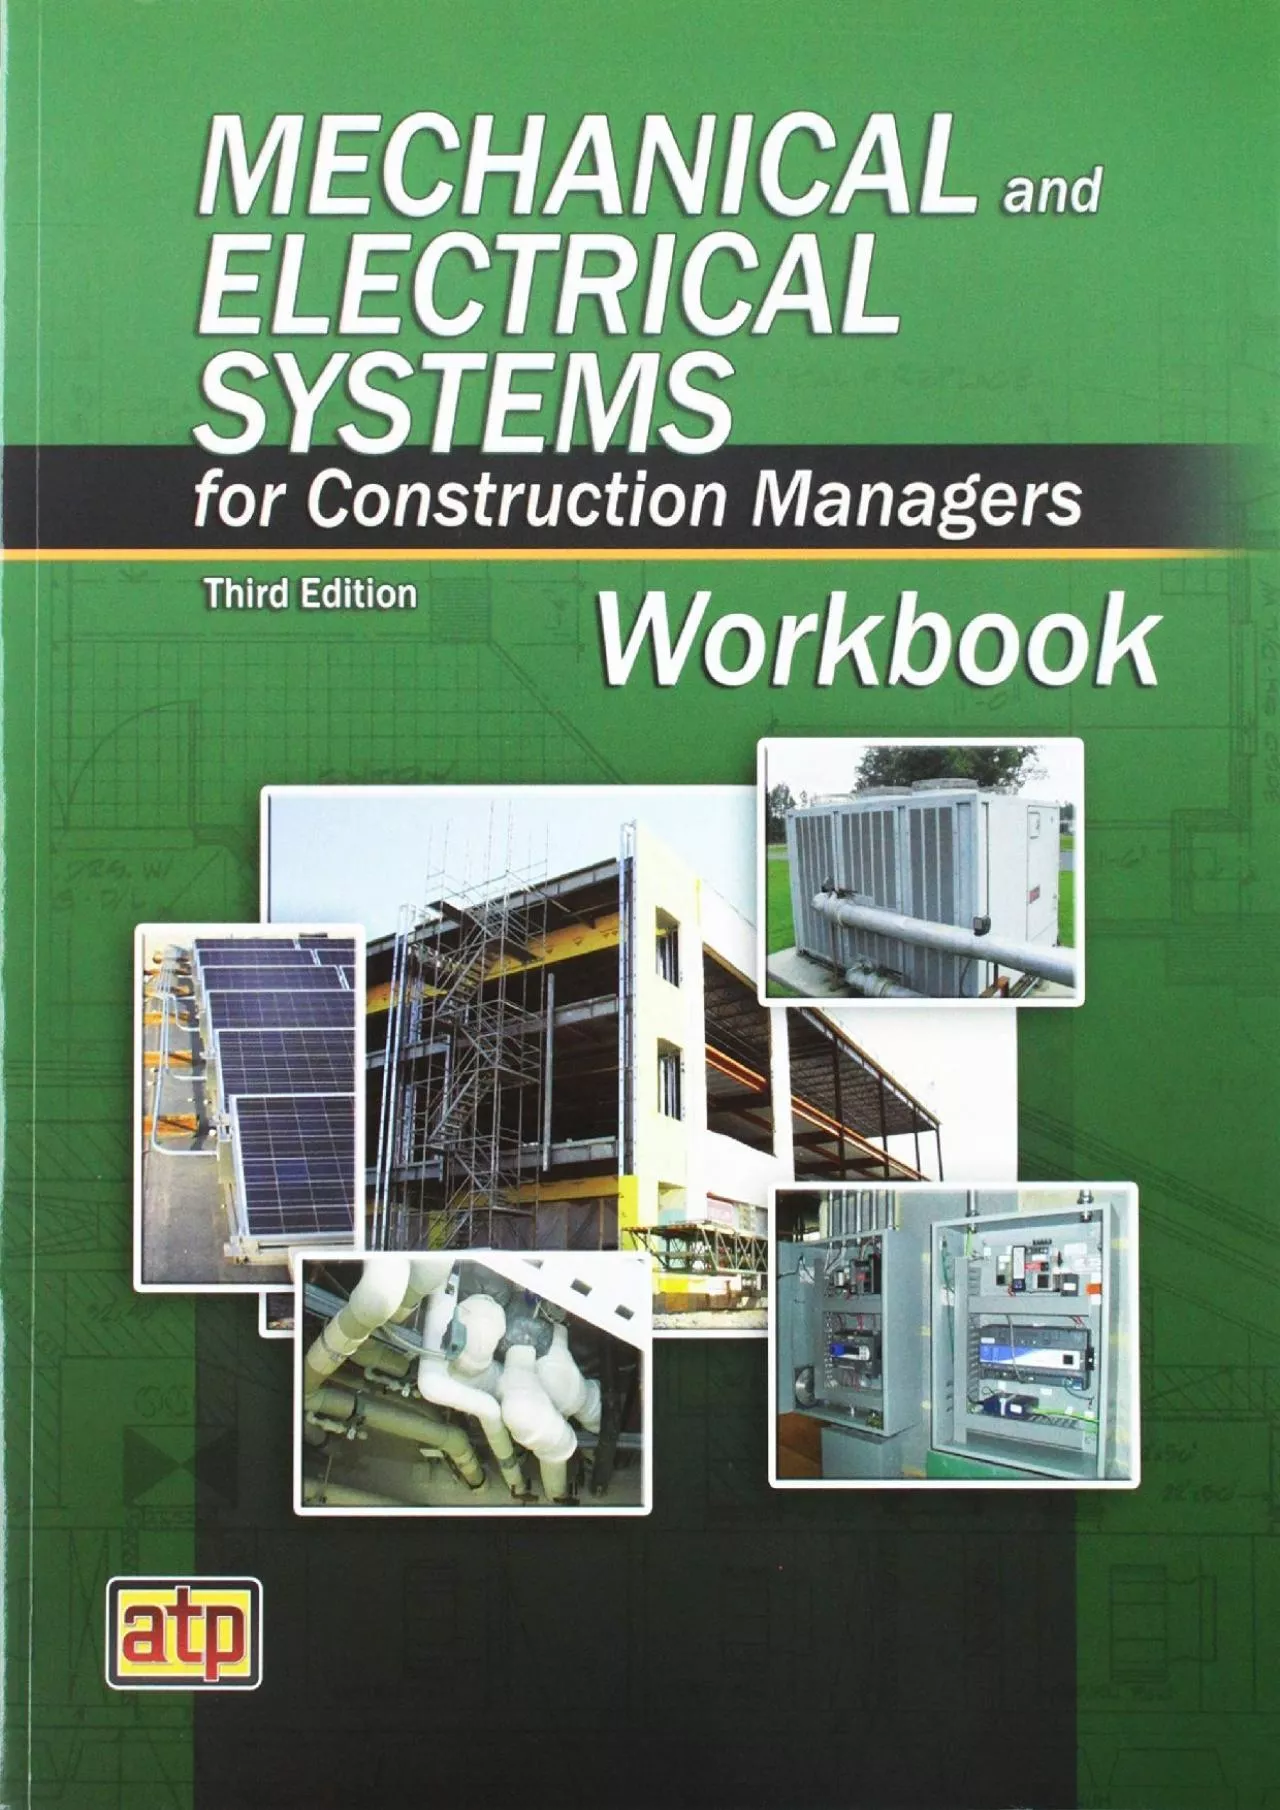 [READ] Mechanical and Electrical Systems for Construction Managers Workbook